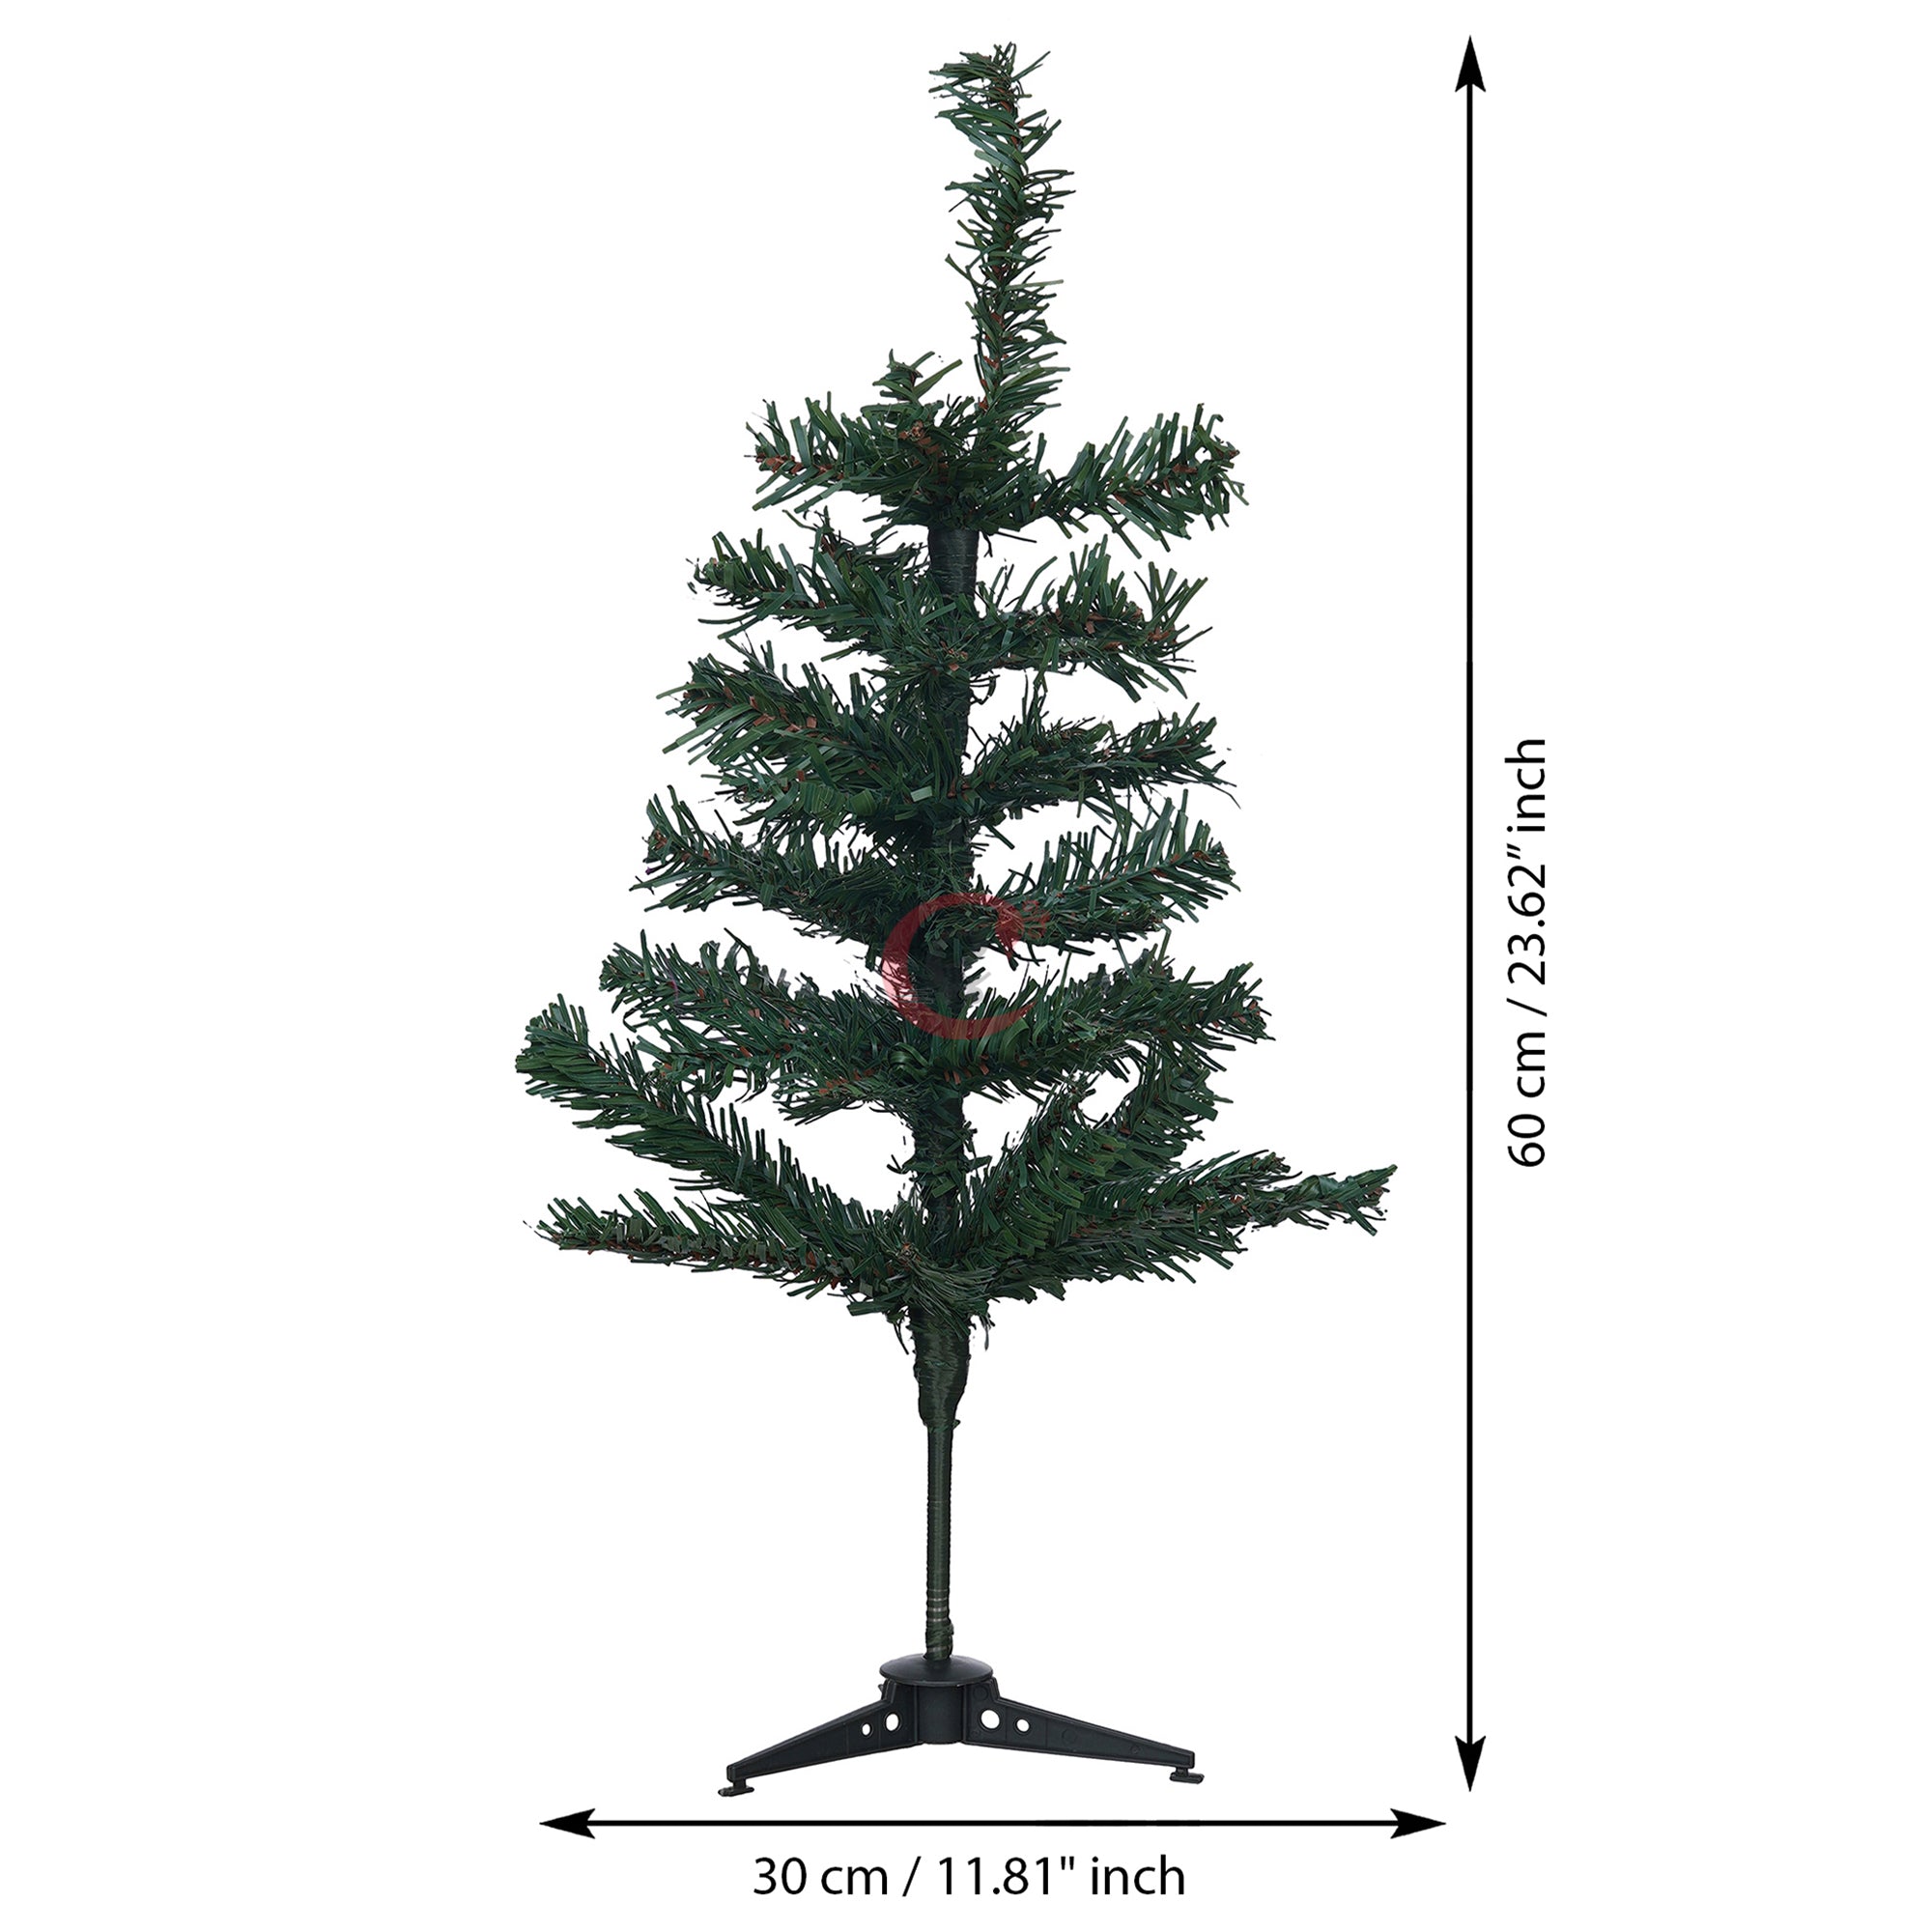 eCraftIndia 2 Feet Green Artificial Christmas Tree Xmas Pine Tree with Stand and 60 Christmas Decoration Ornaments Props - Merry Christmas Decoration Item for Home, Office, and Church 3